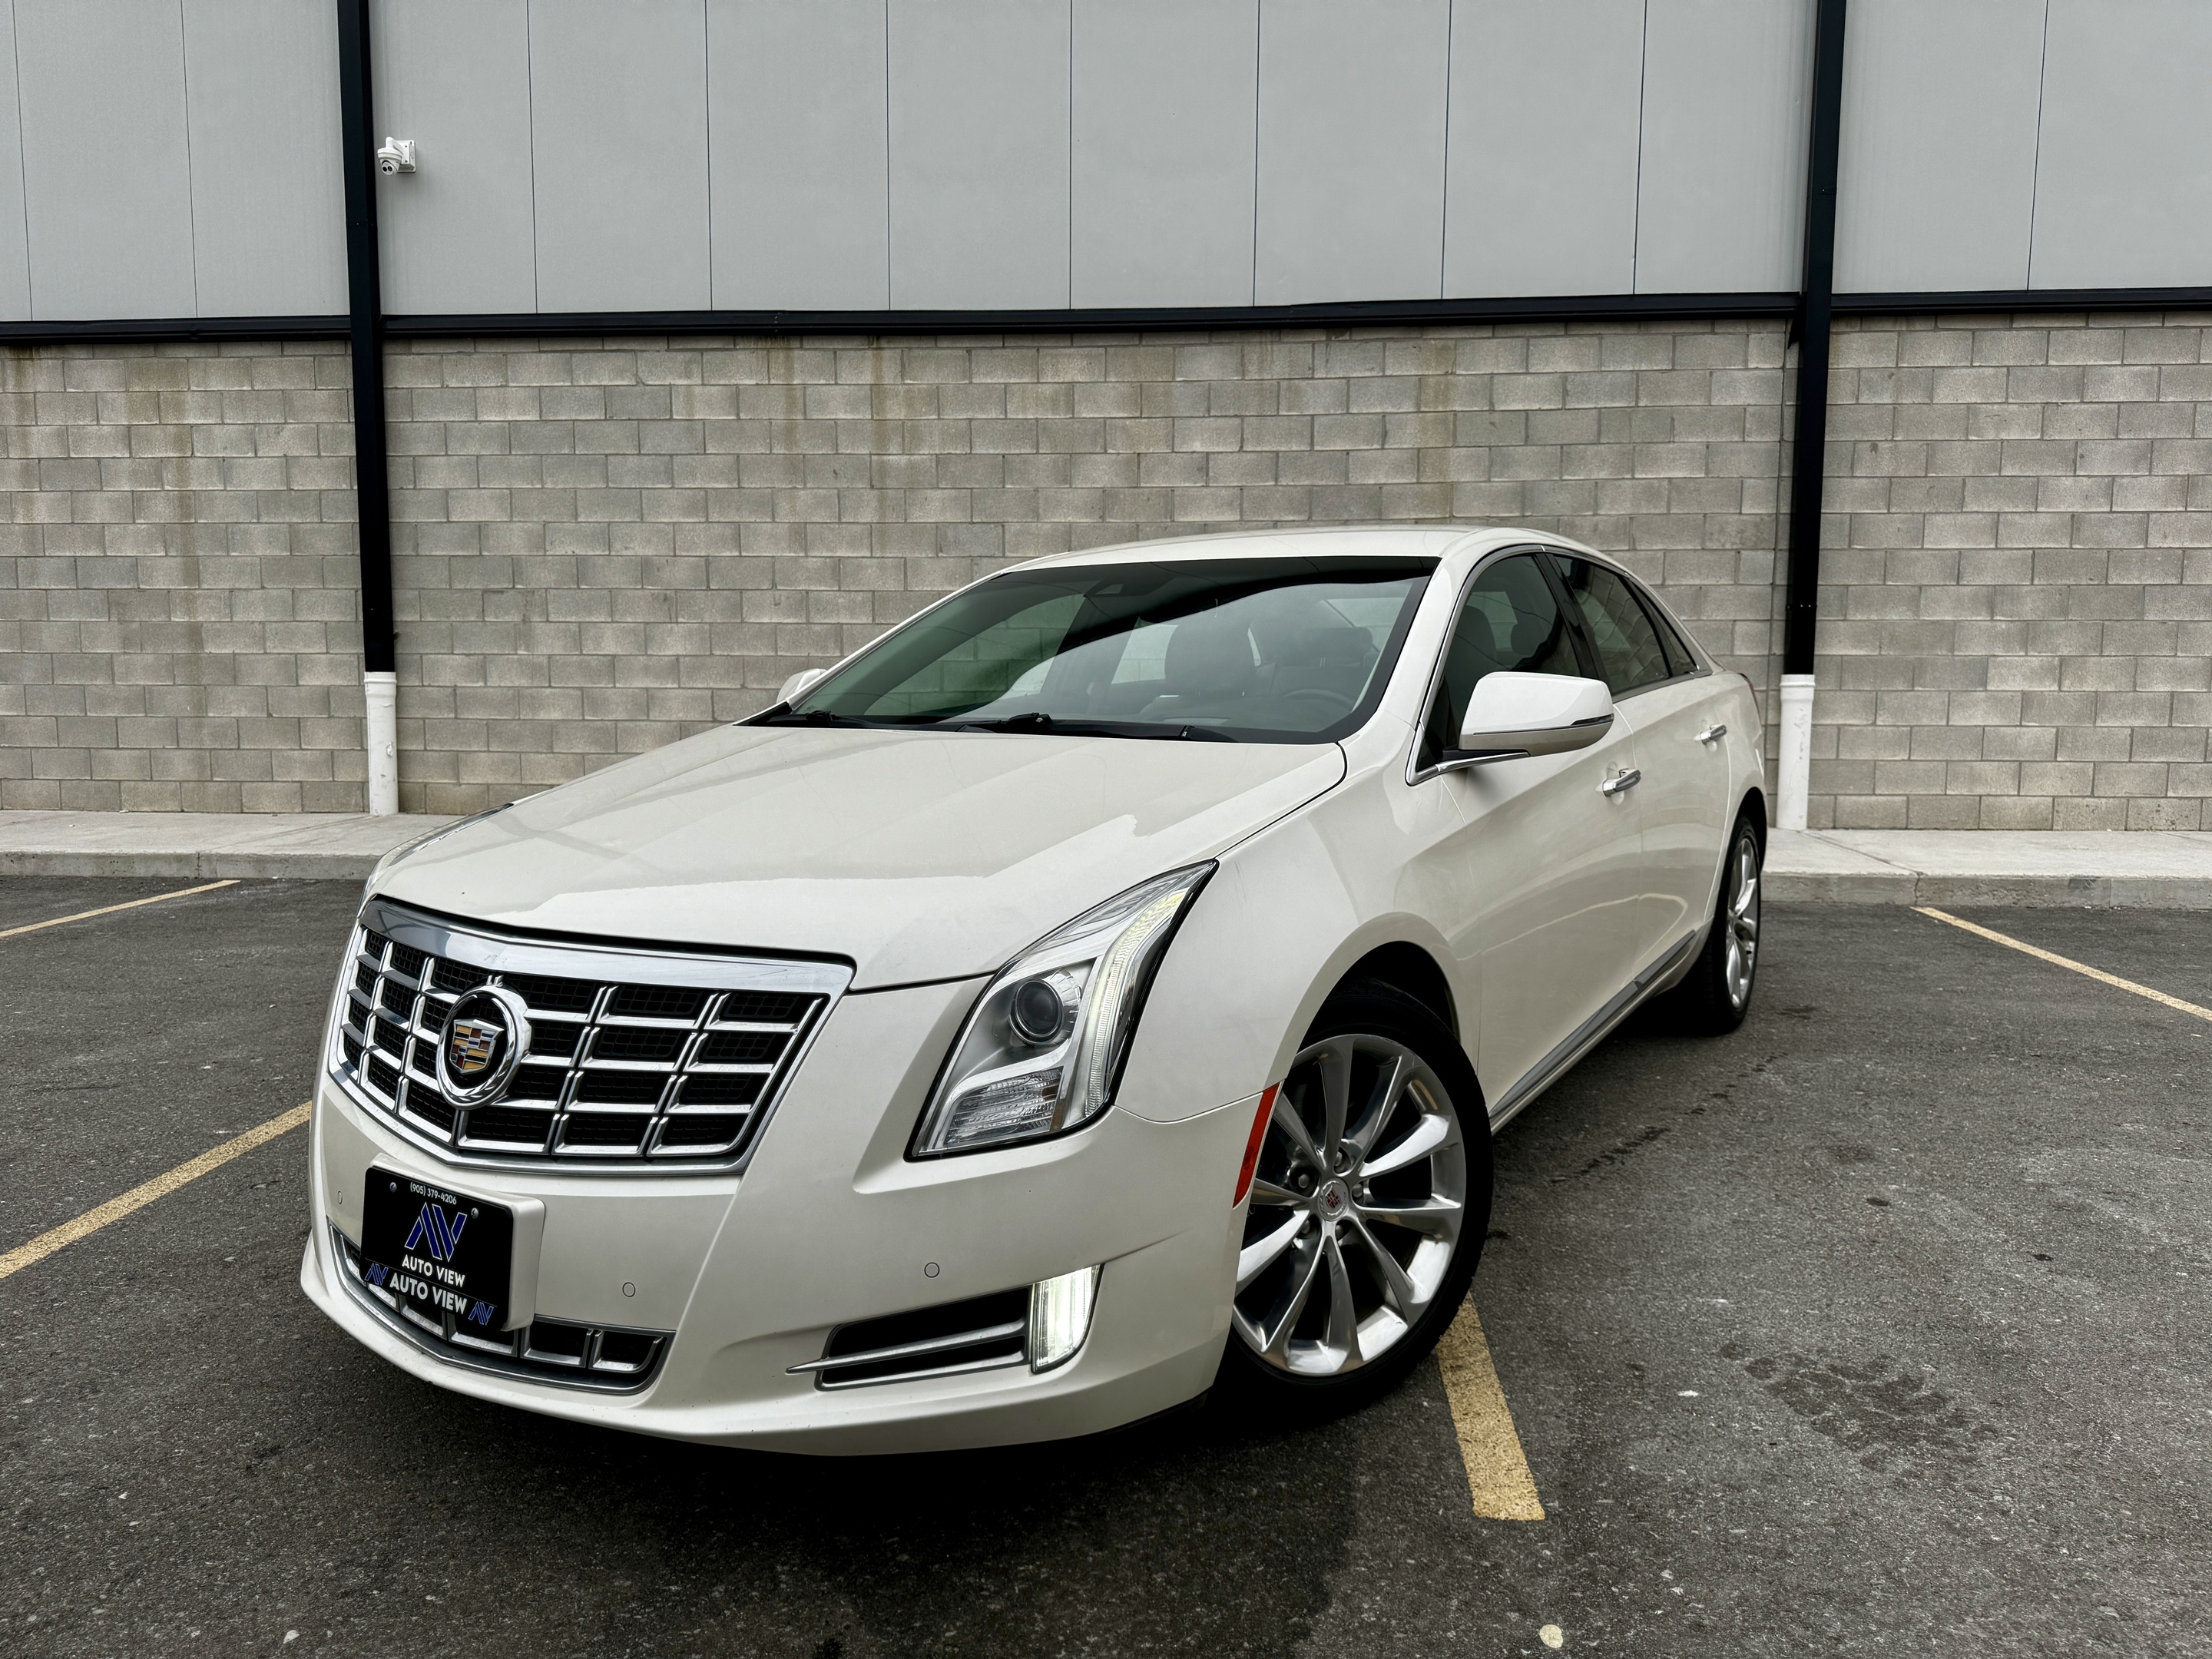 2013 Cadillac XTS 4dr Sdn Premium Collection FWD